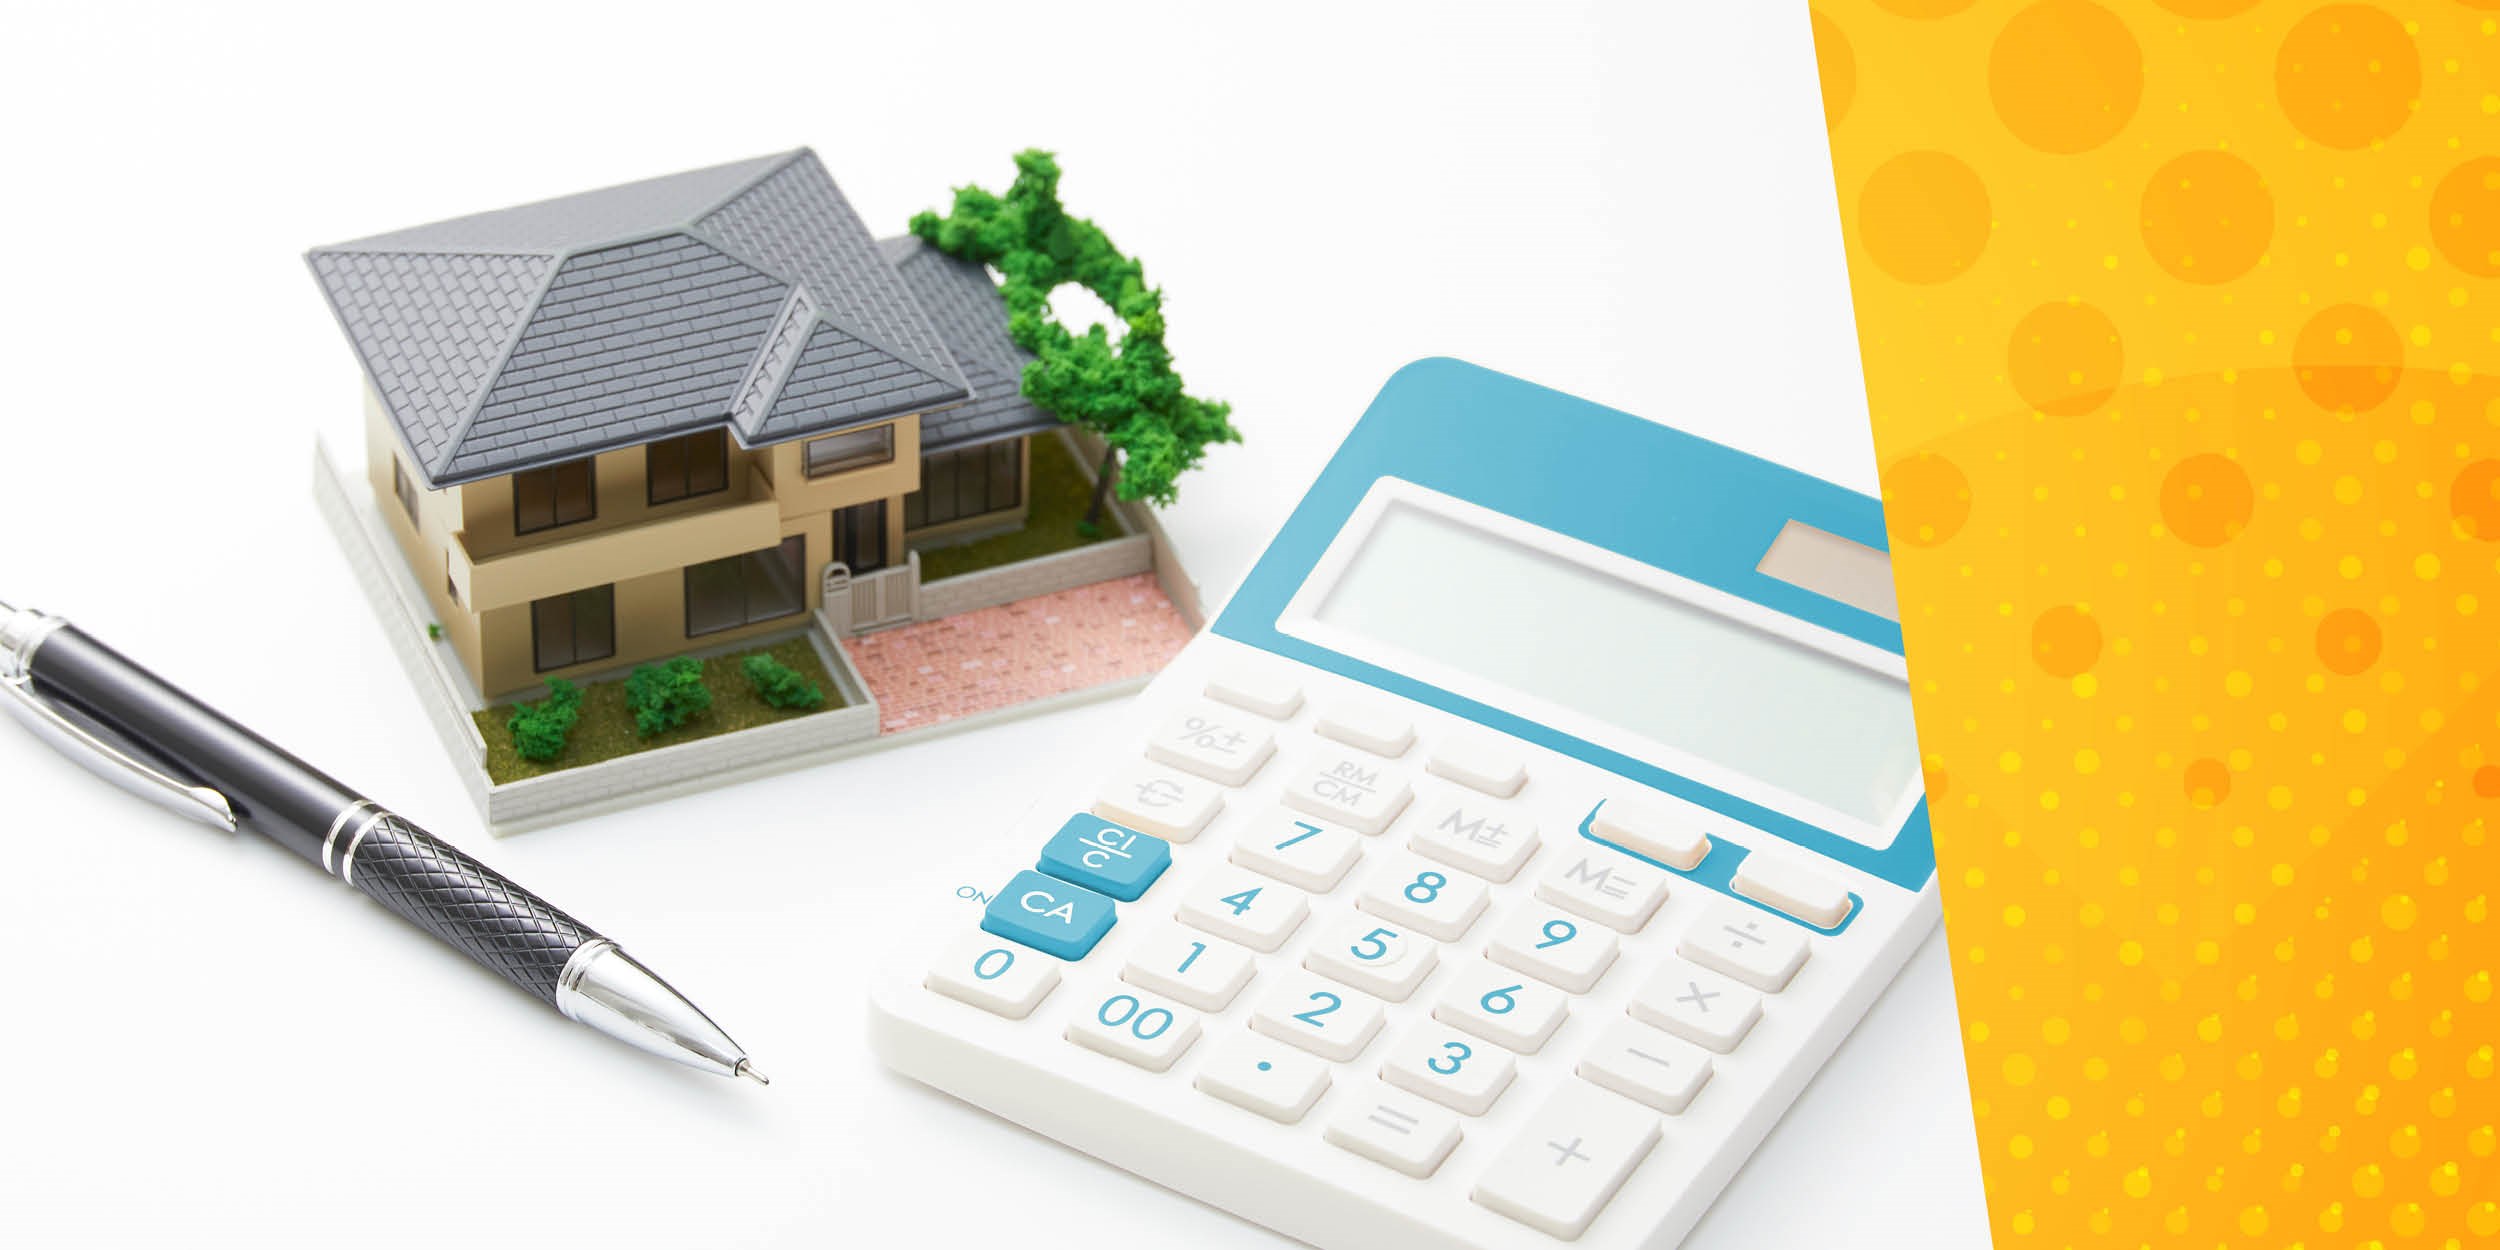 Miniature model house, calculator and pen with yellow spotted background